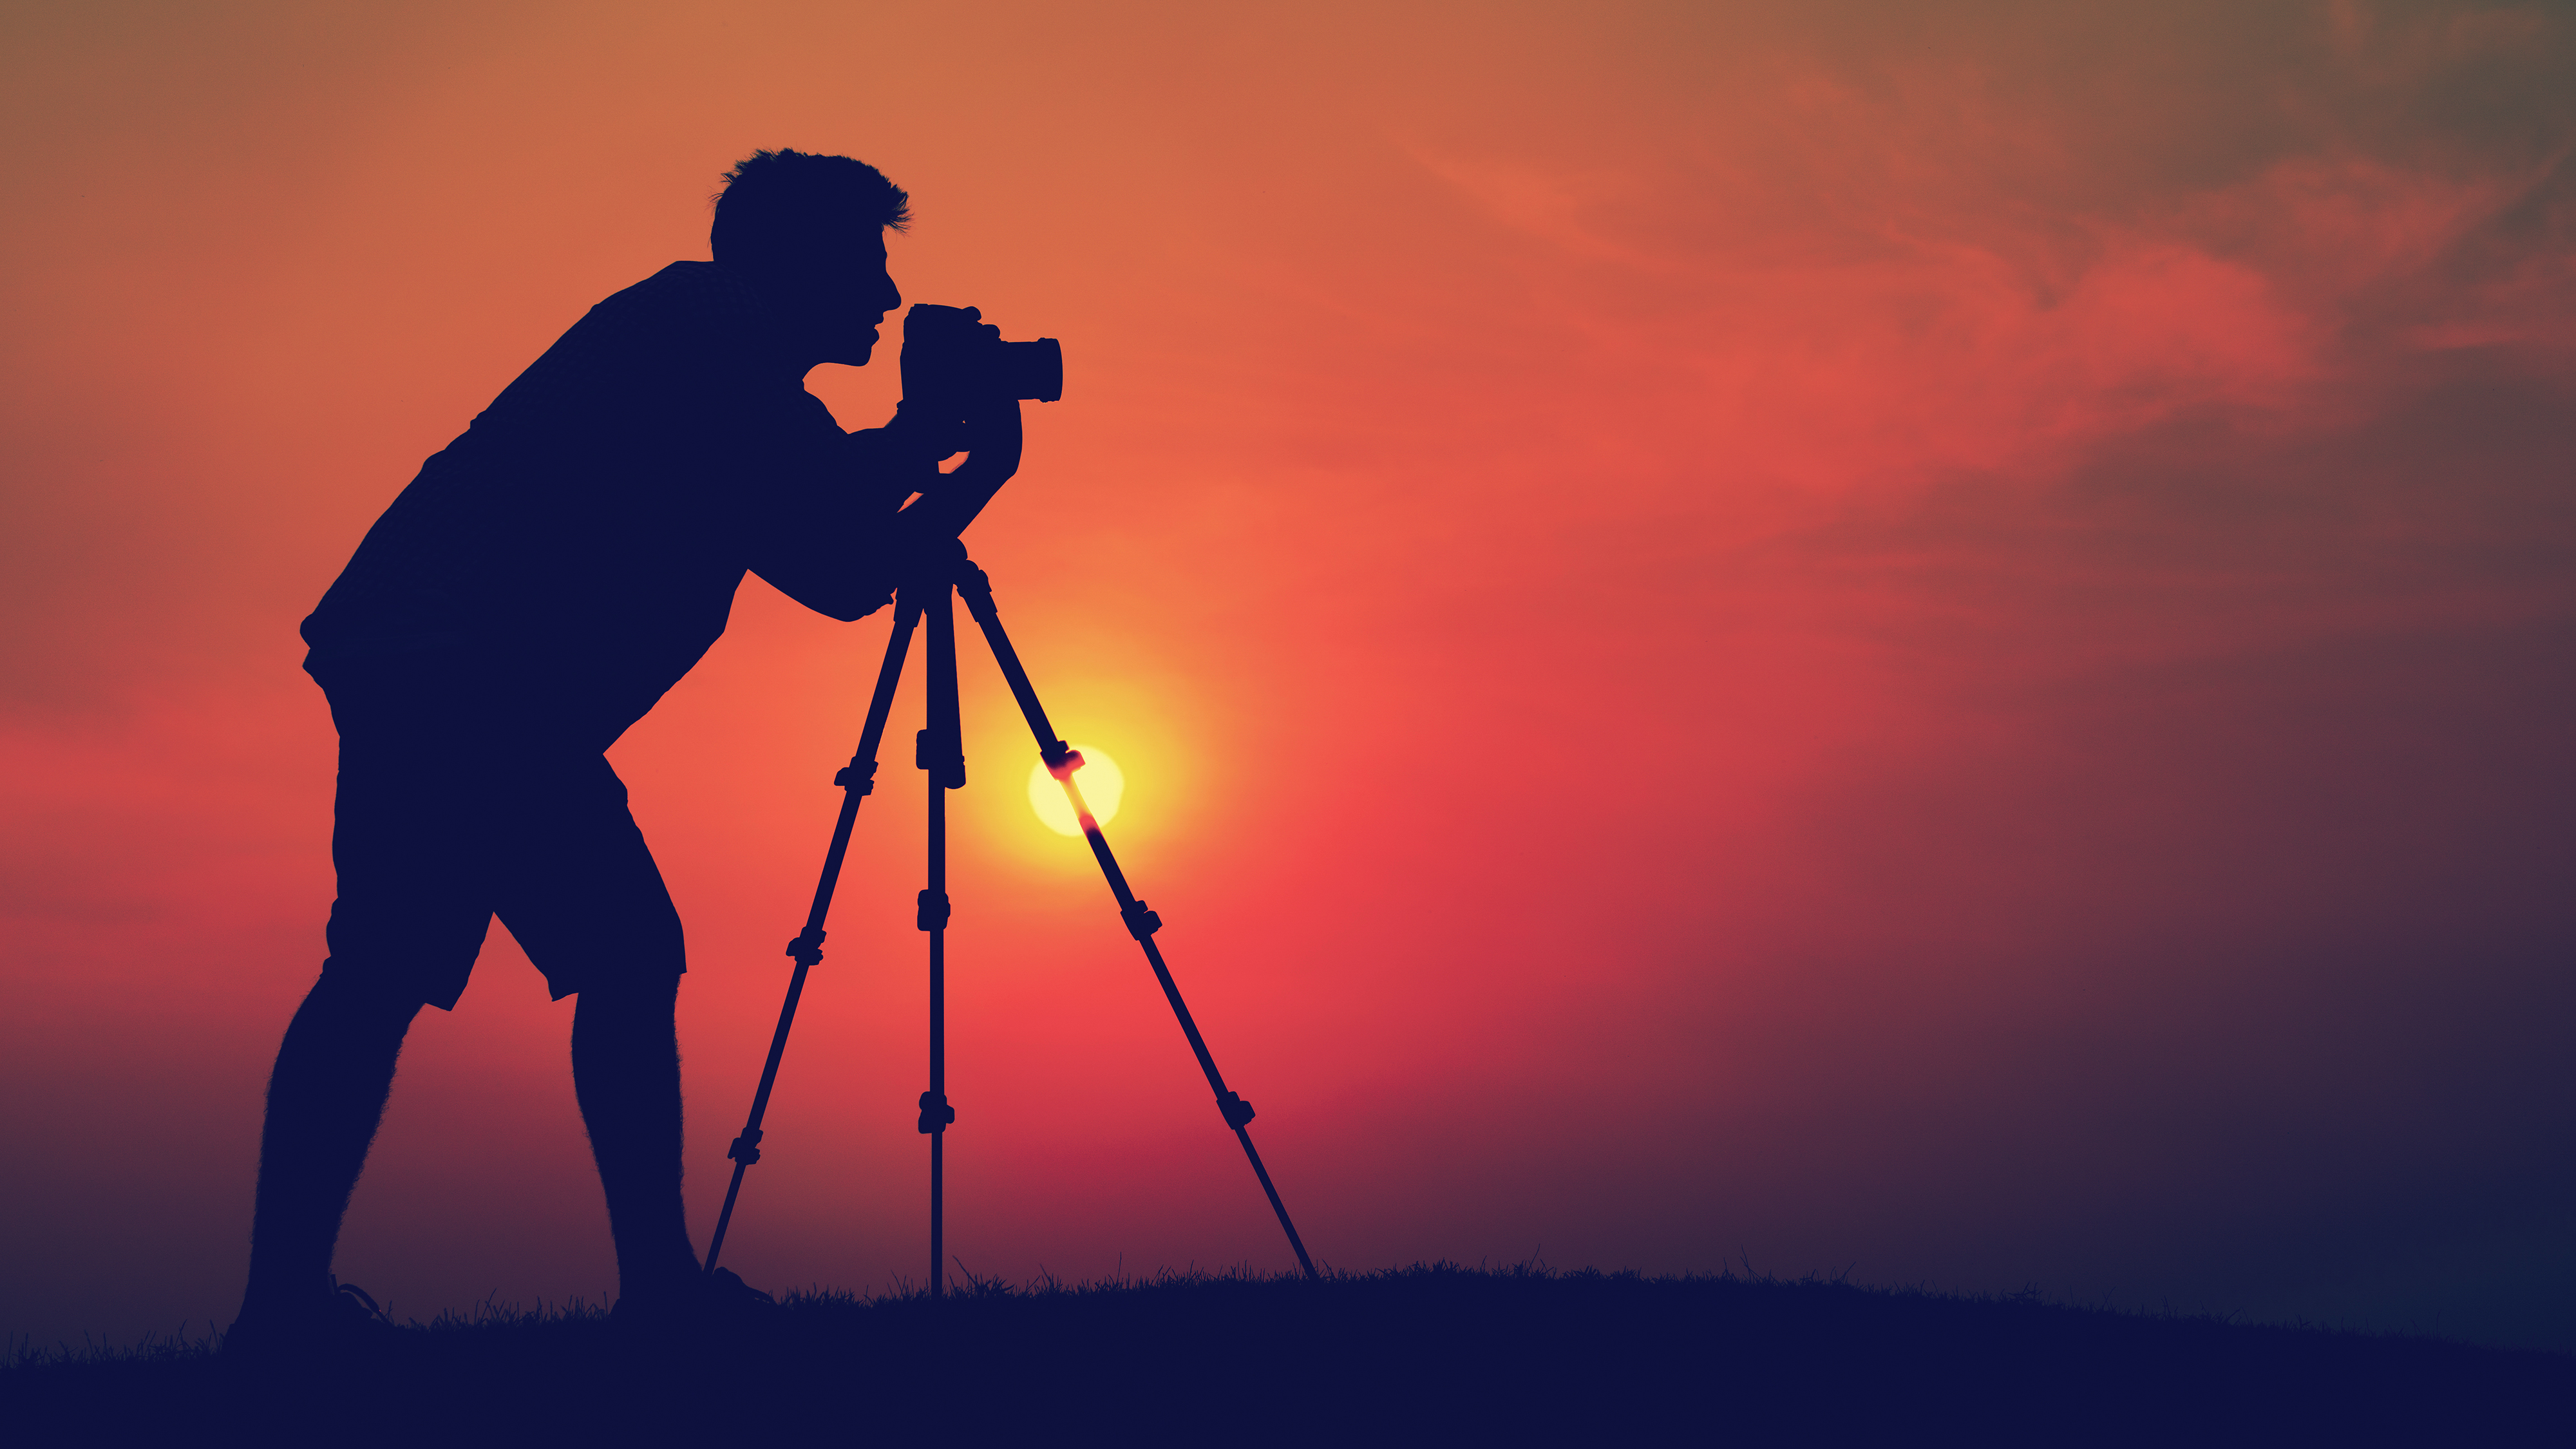 77 photography tips and tricks for taking pictures of anything | TechRadar